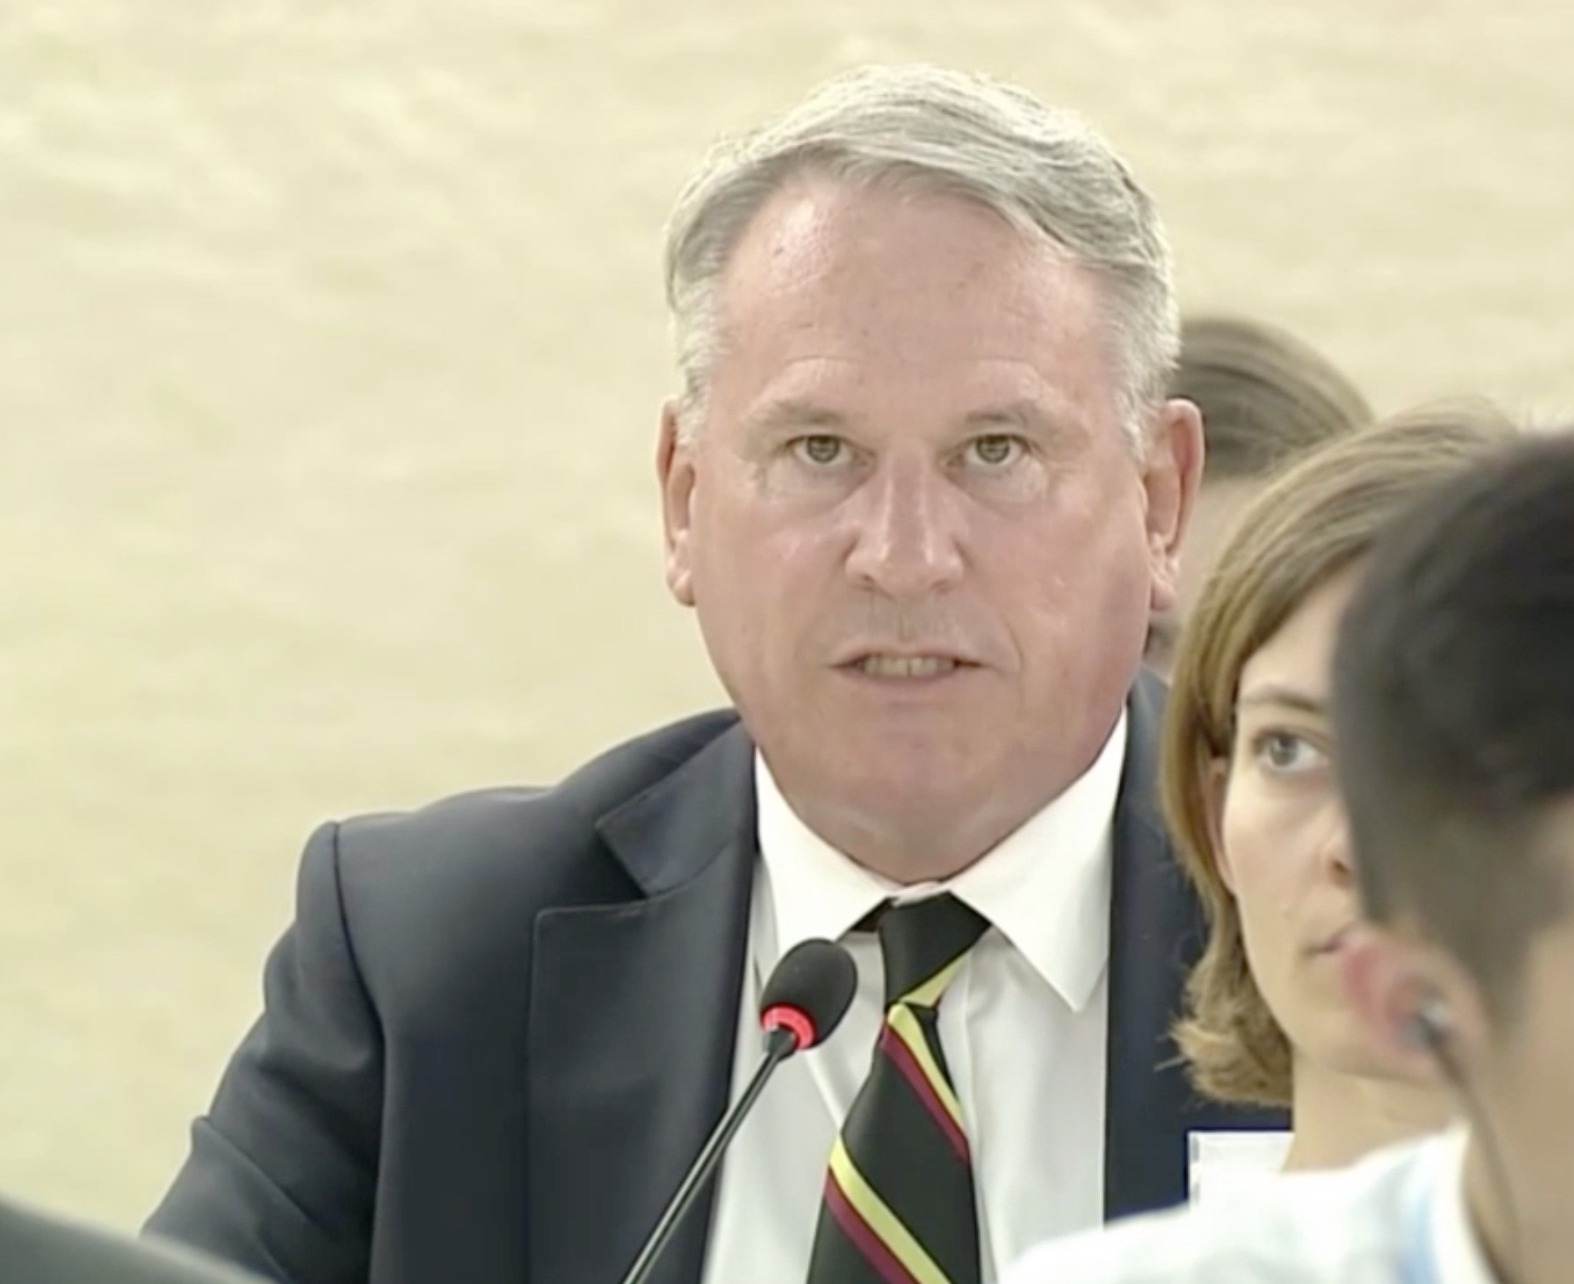 Colonel Kemp's Testimony at the Emergency Session of the United Nations Human Rights Council on the Deteriorating Situation in Gaza 